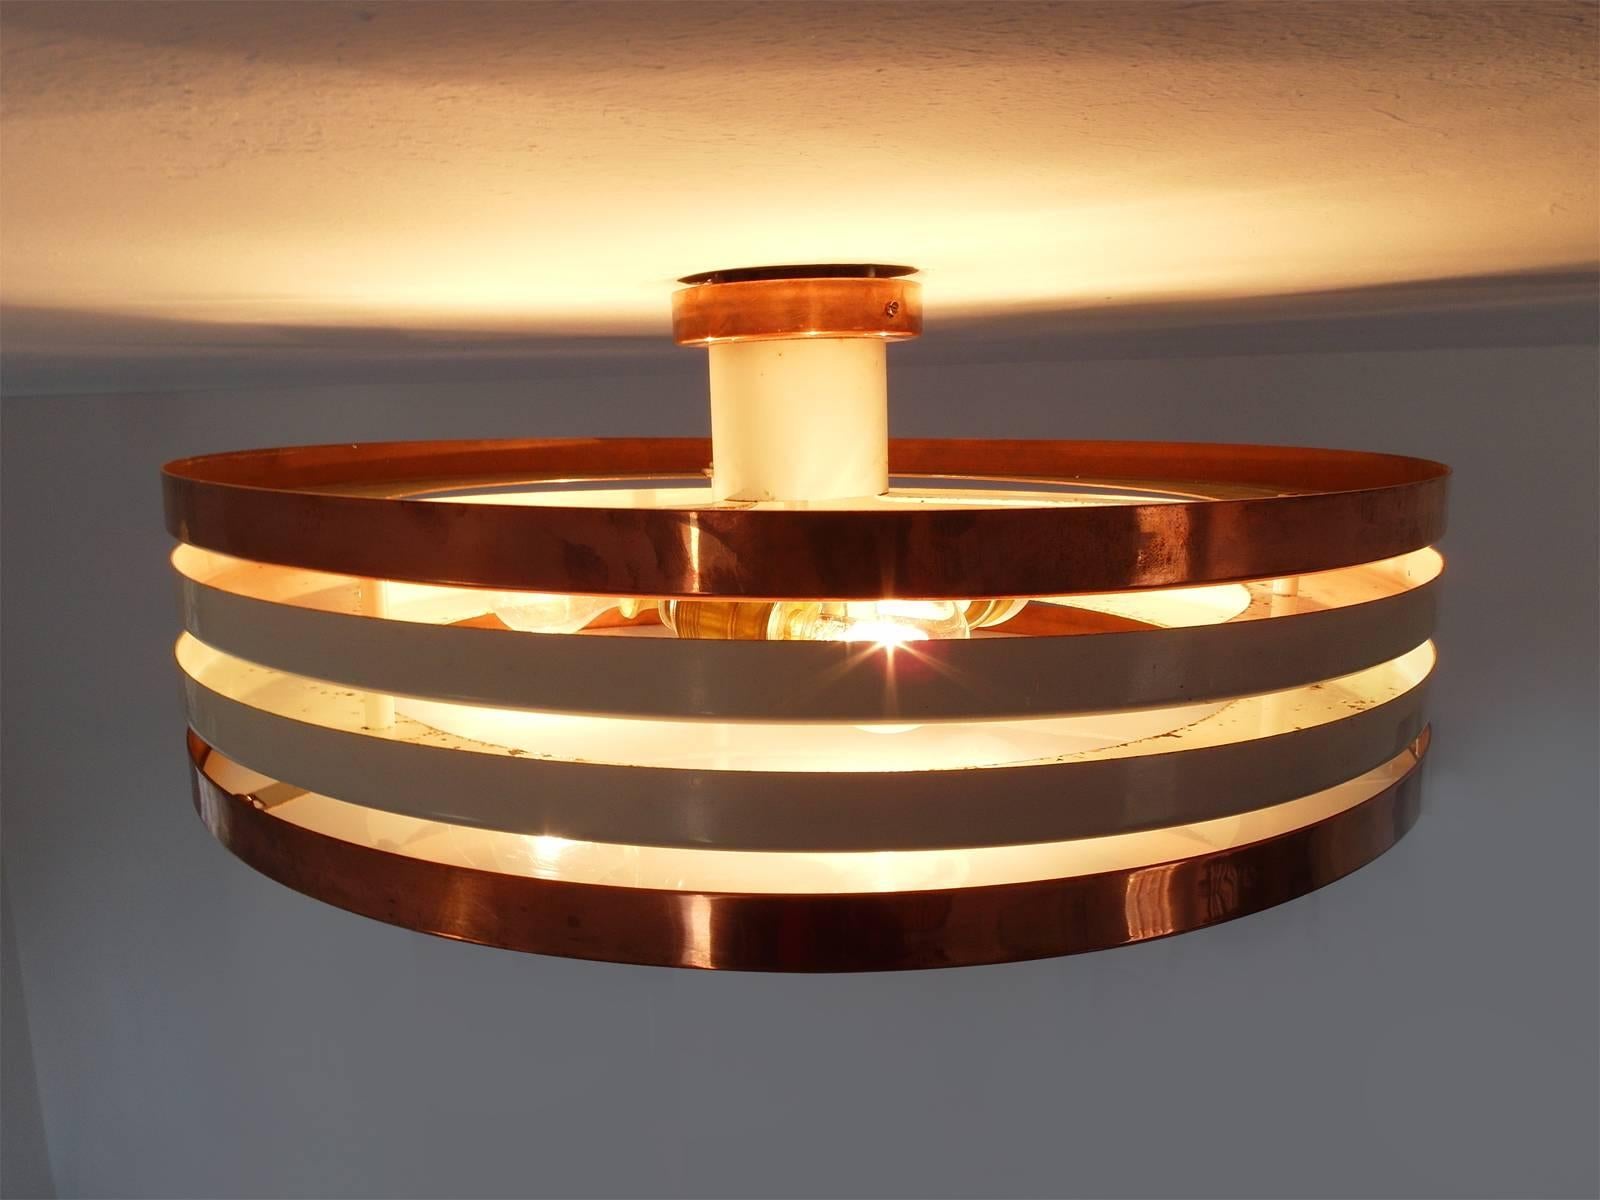 A Scandinavian Modern flush mount fixture by Itsu, Finland, 1950s. 
A three-light plexiglass and copper ceiling lamp consisting from four rings, creating an open structure in copper and white aluminium. The lamp spreads a very nice warm glow. A